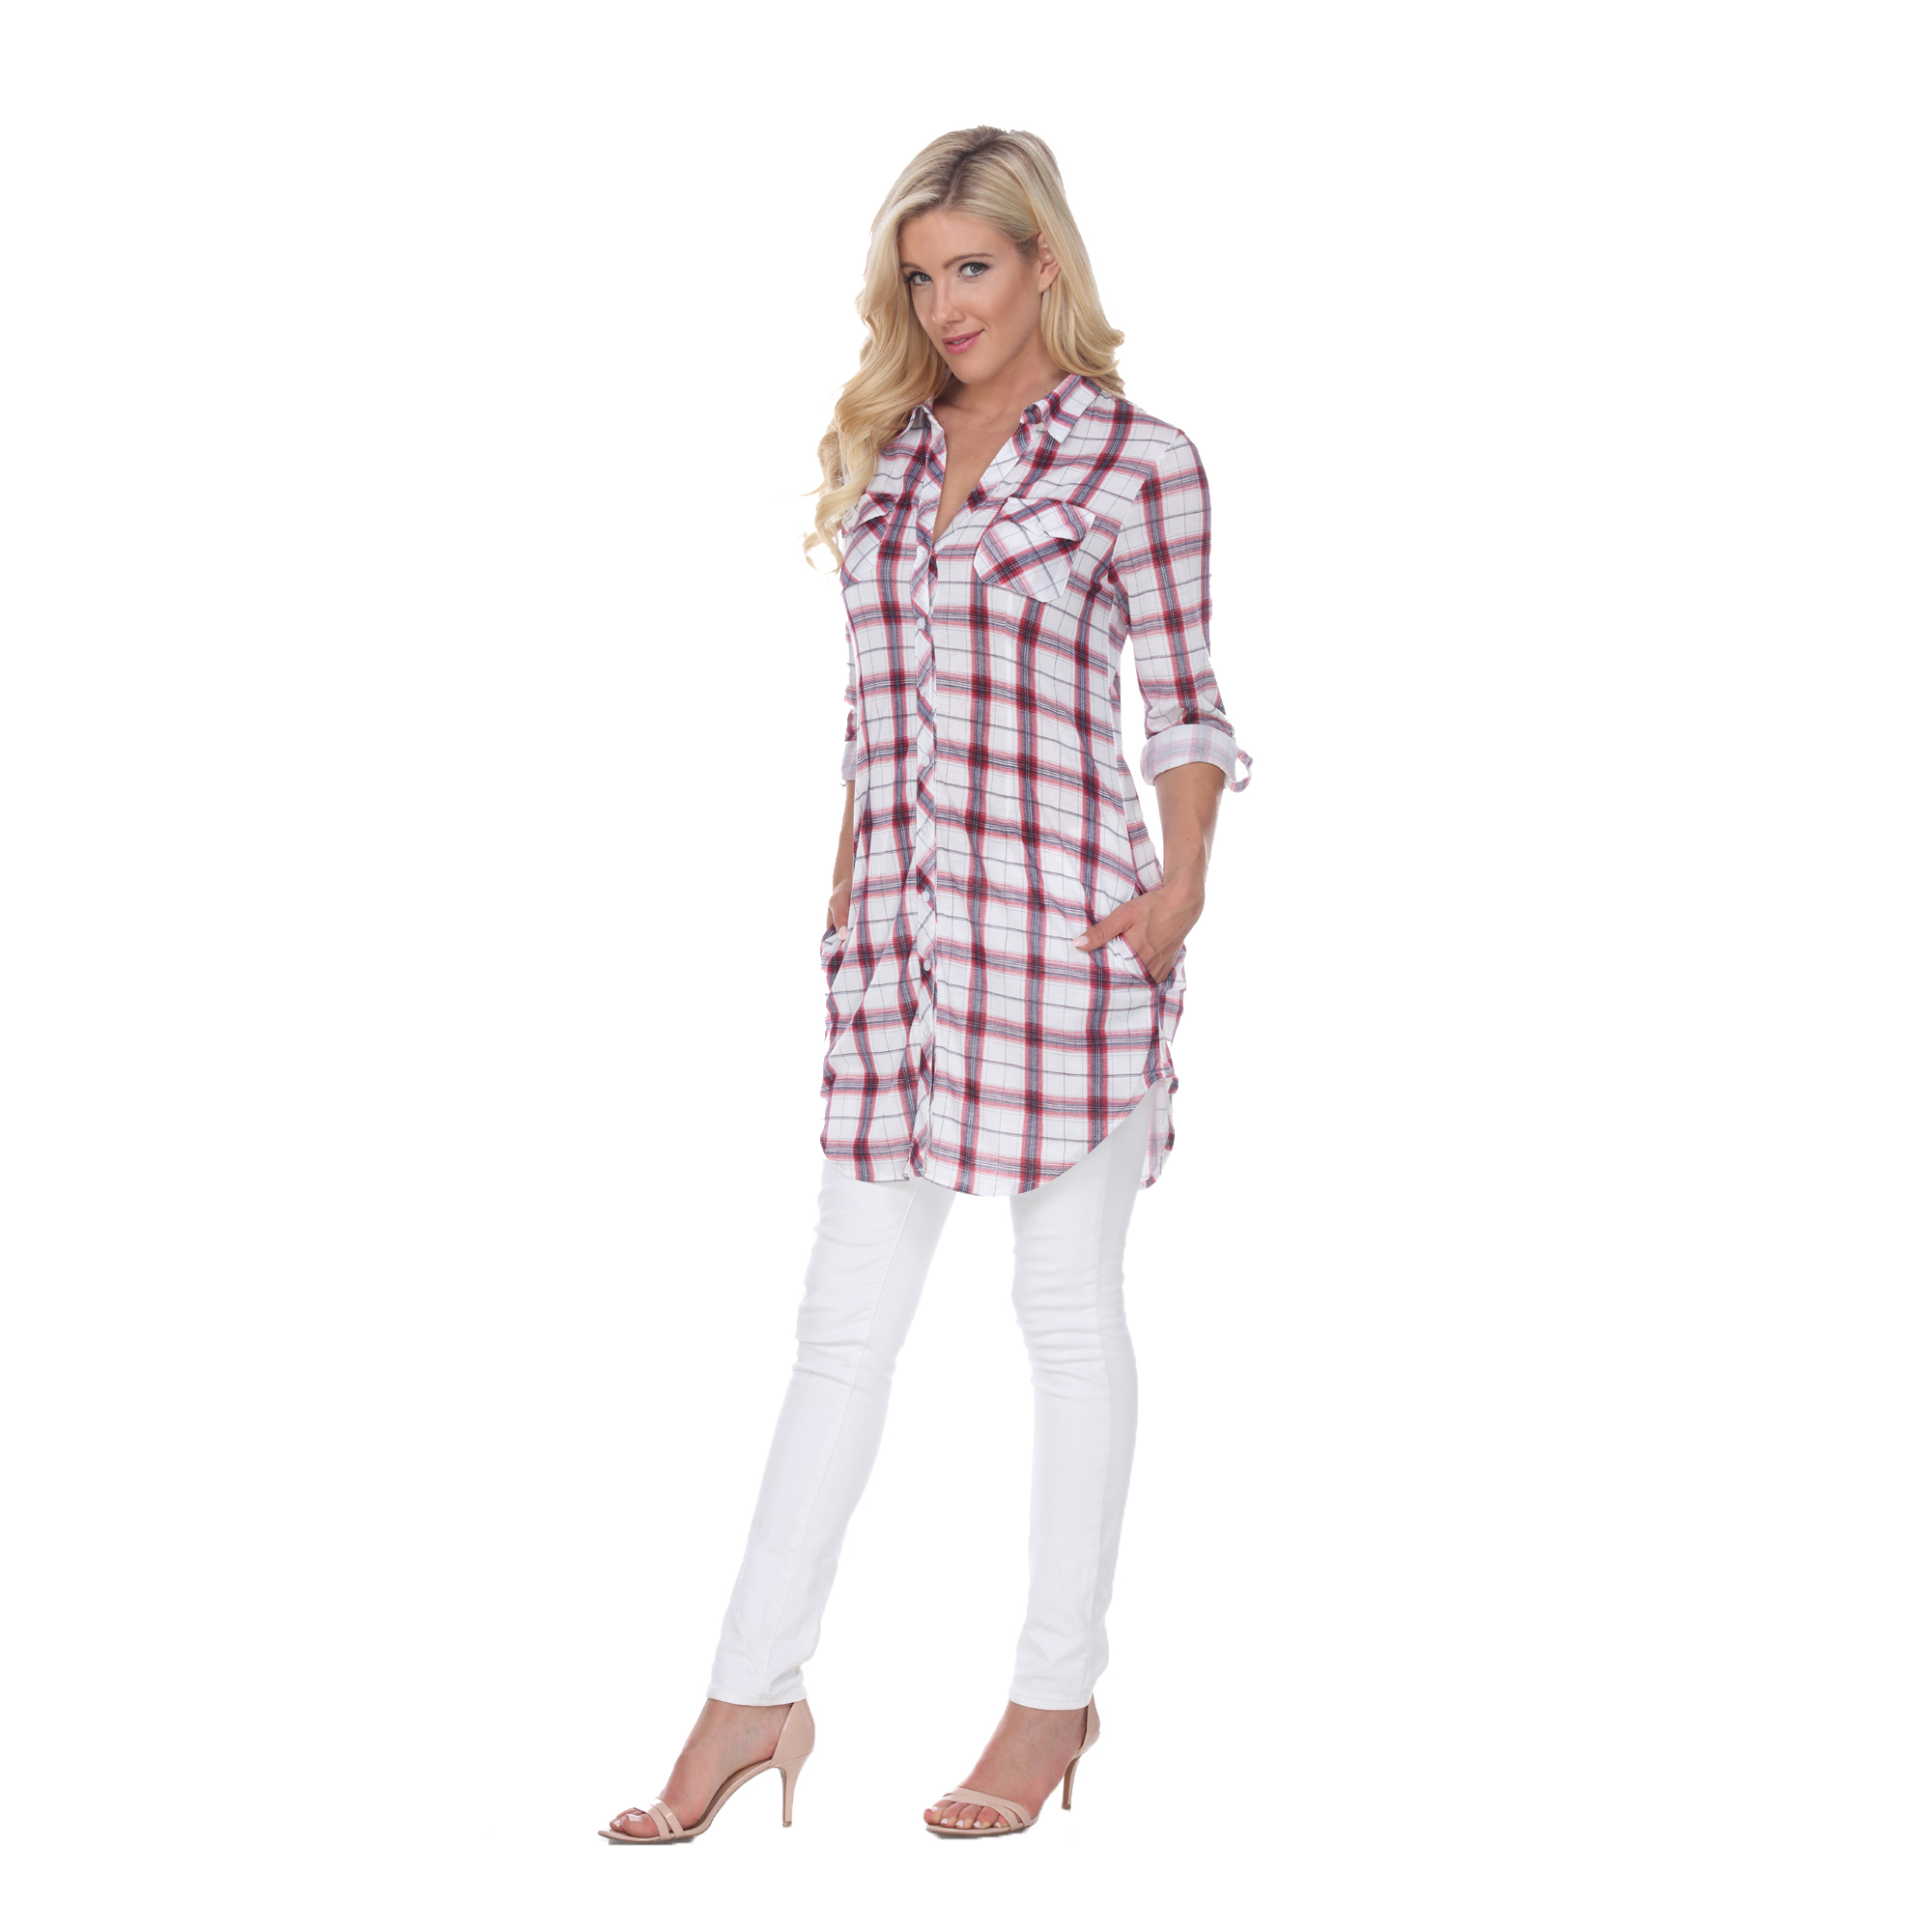 White Mark Women's Stretchy Plaid Flannel Tunic Top - Red/White, 3X